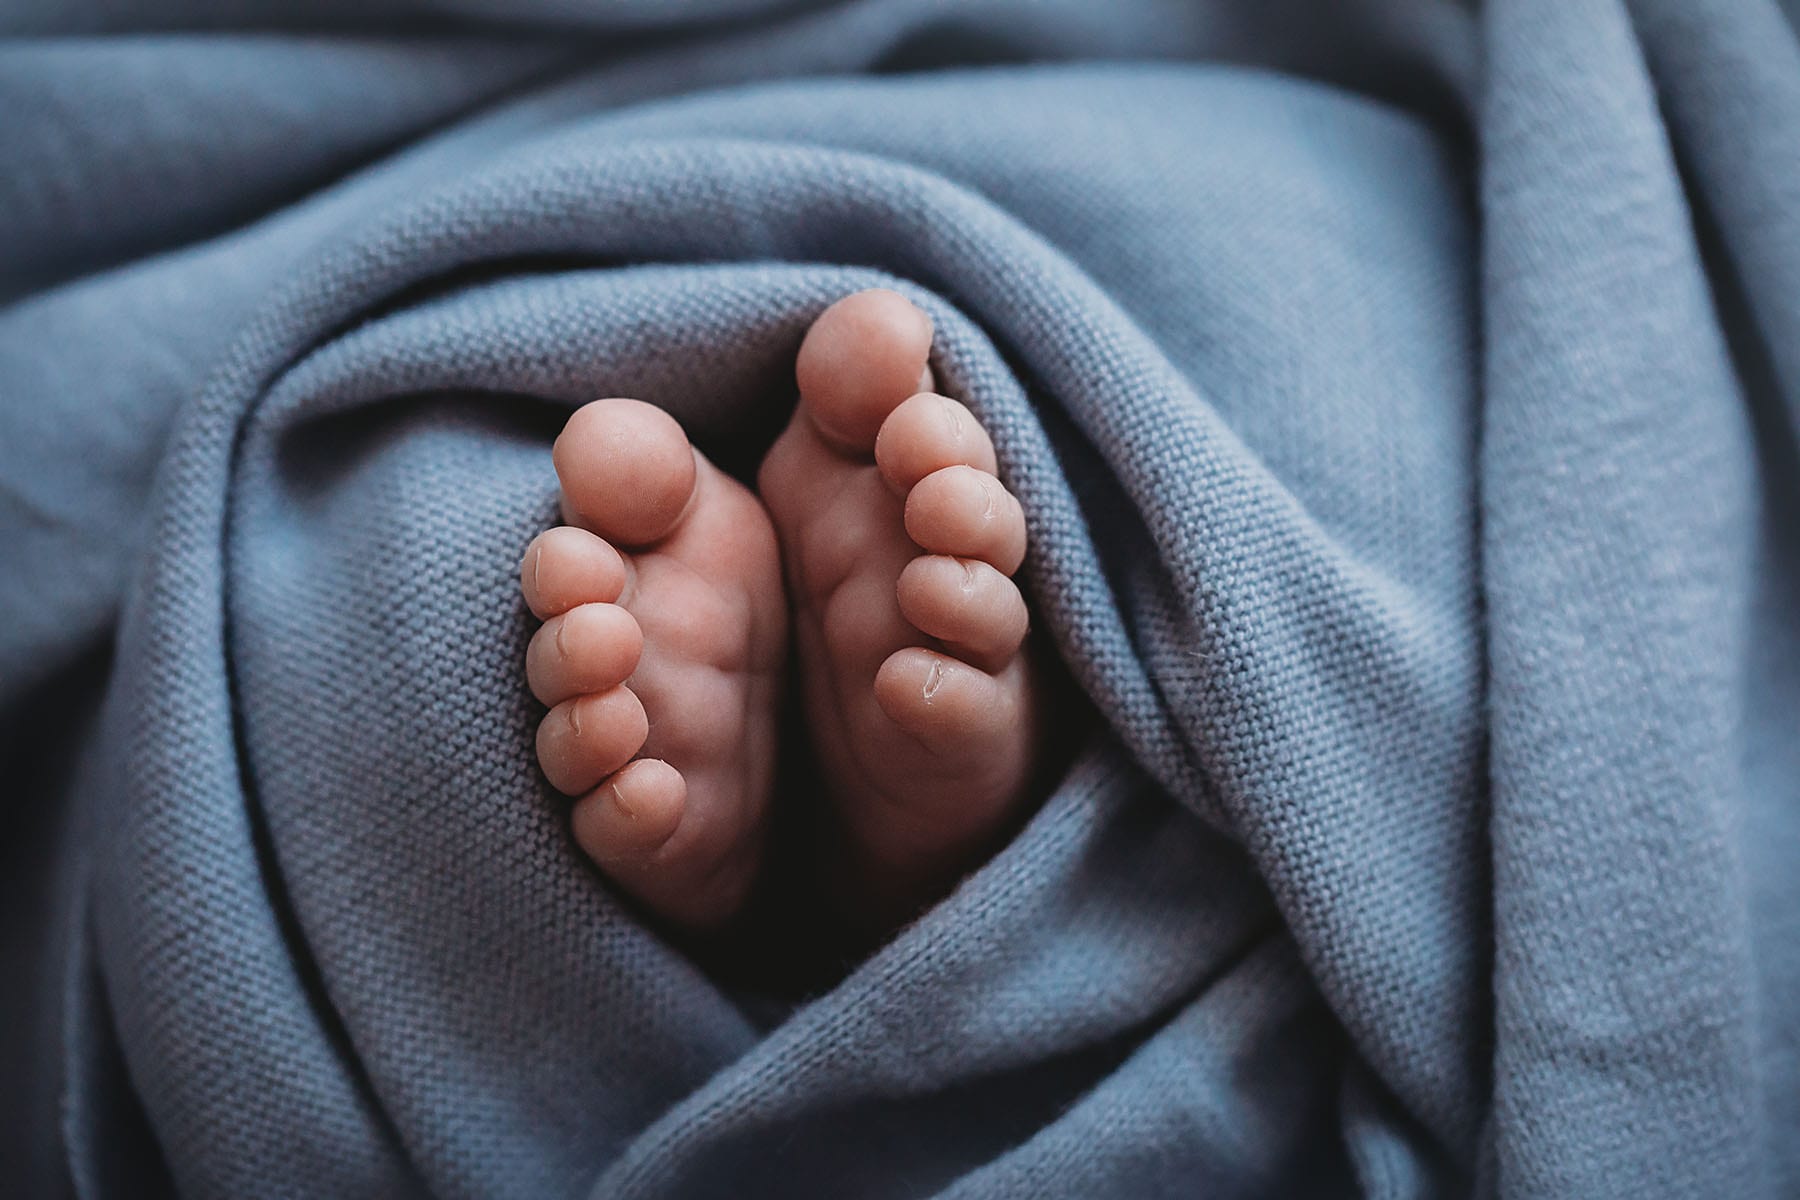 Newborn baby toes poke out from underneath a blue blanket